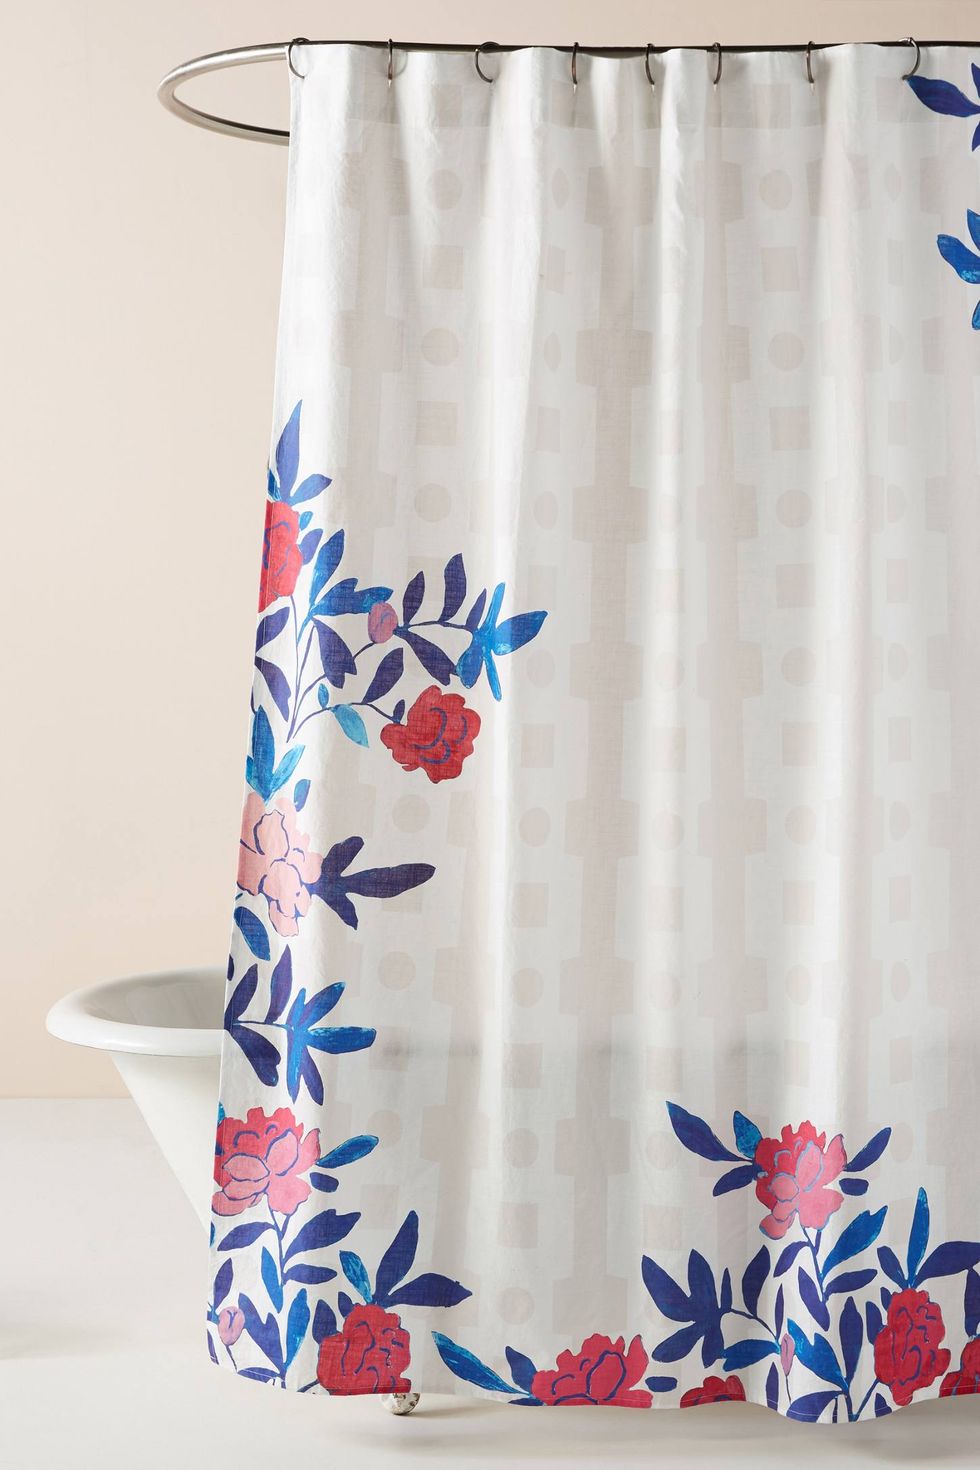 Shop Anthropologie's Whimsical New Paule Marrot Collection - See Our ...